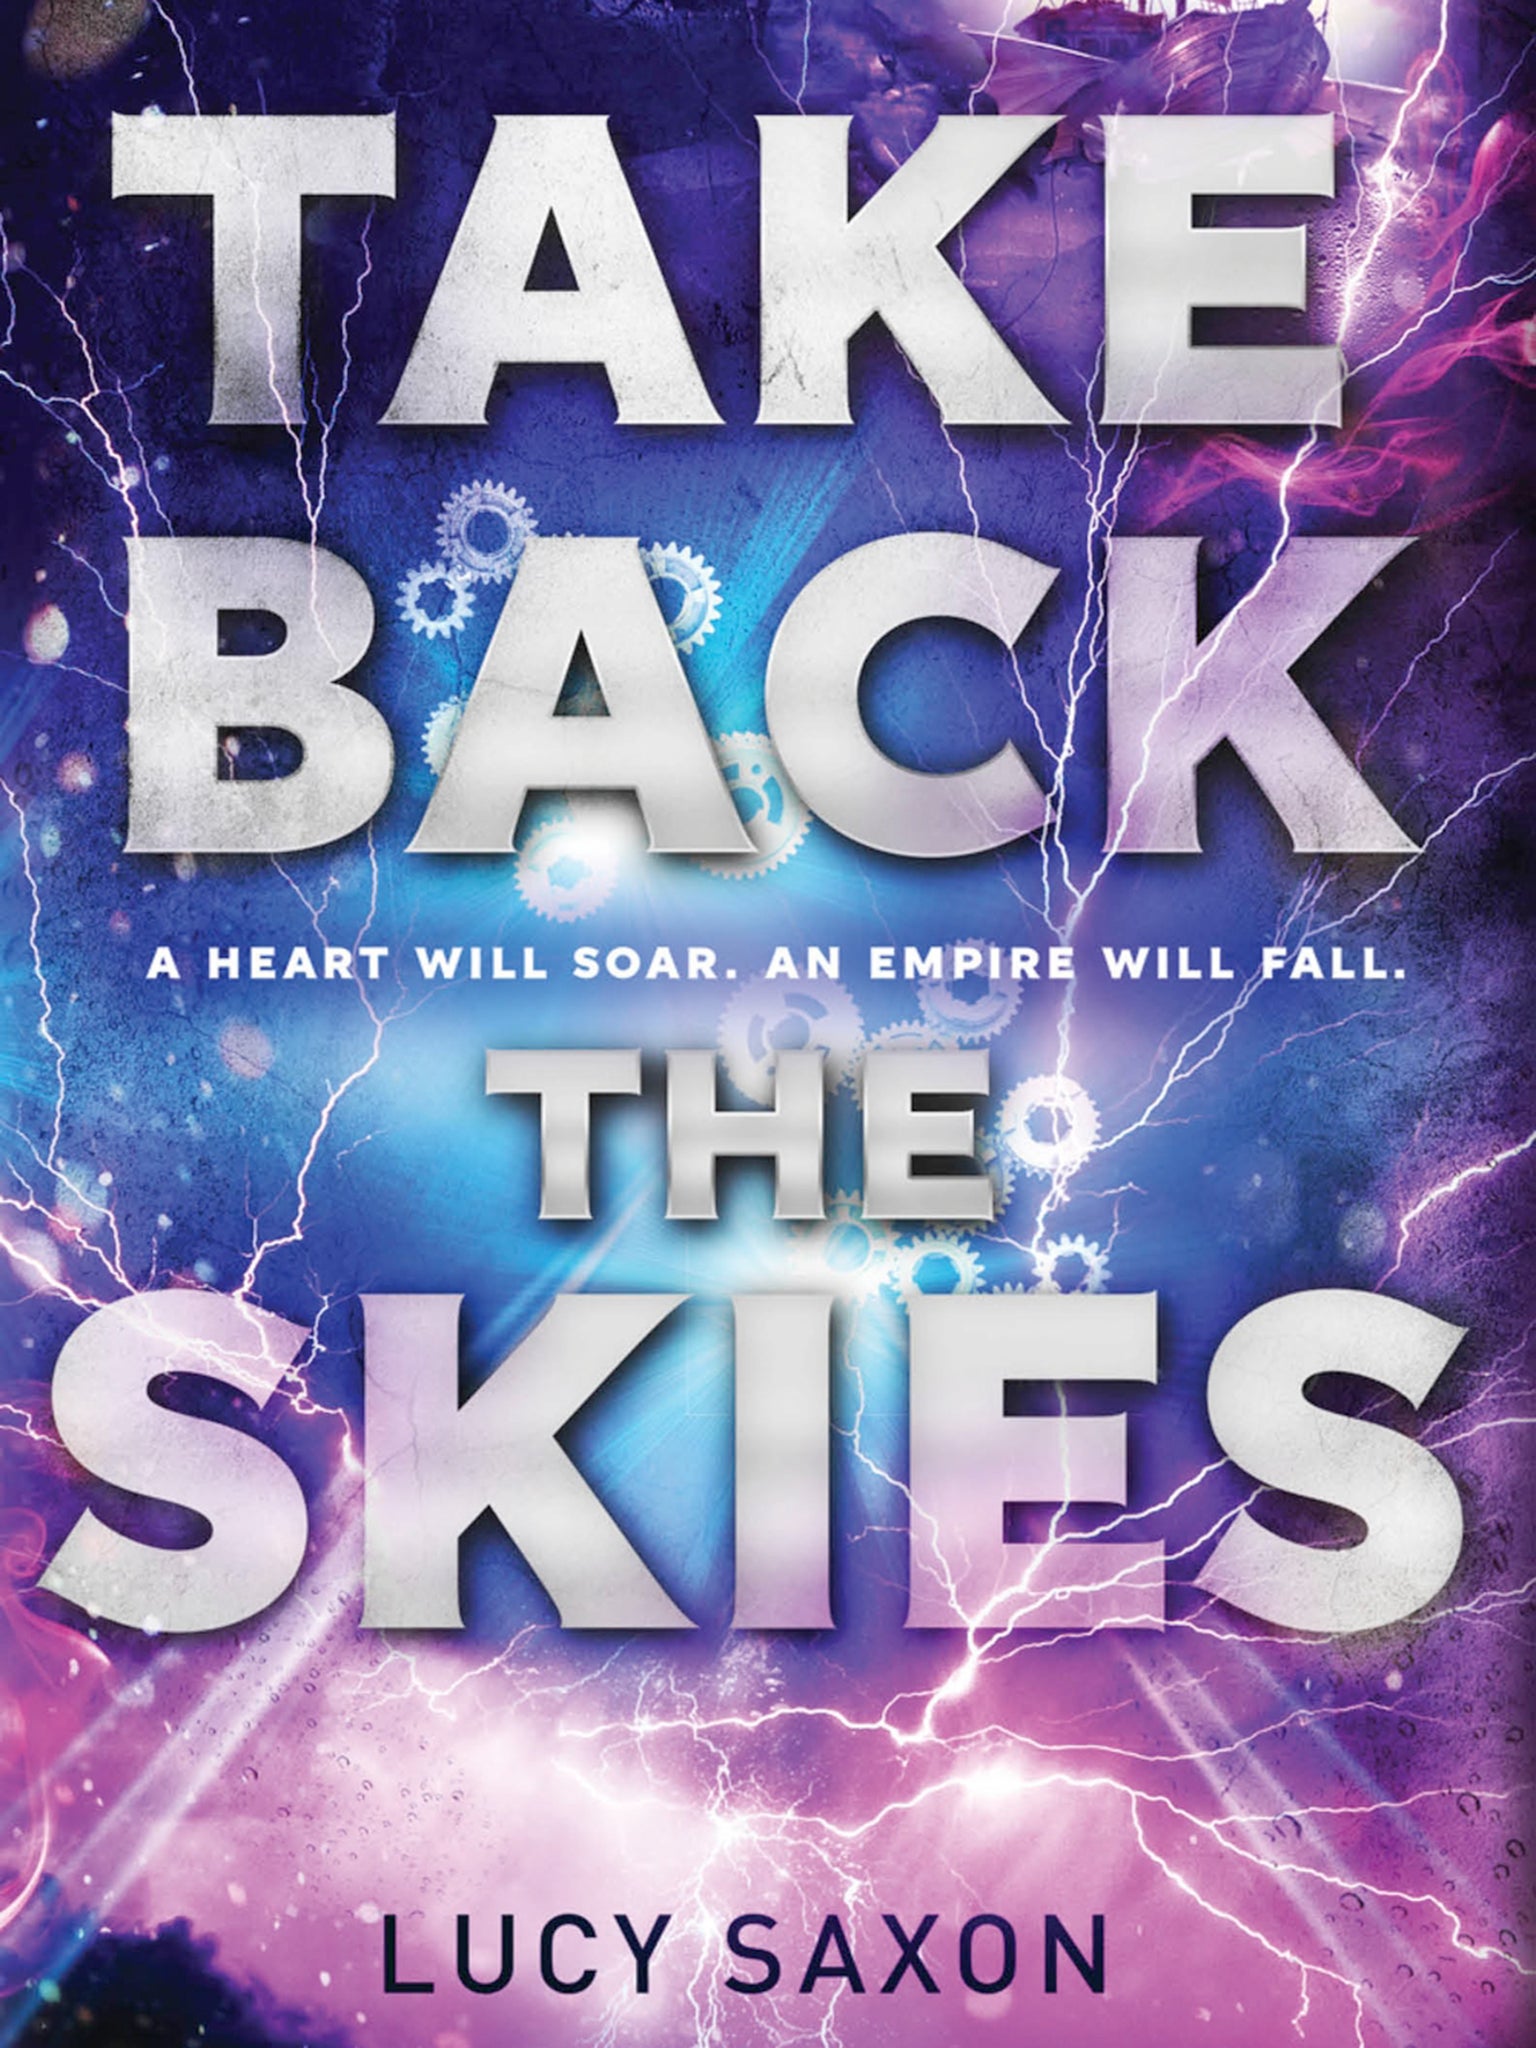 Lucy Saxon’s first novel, Take Back the Skies, is the first in a planned six-part series of young adult novels